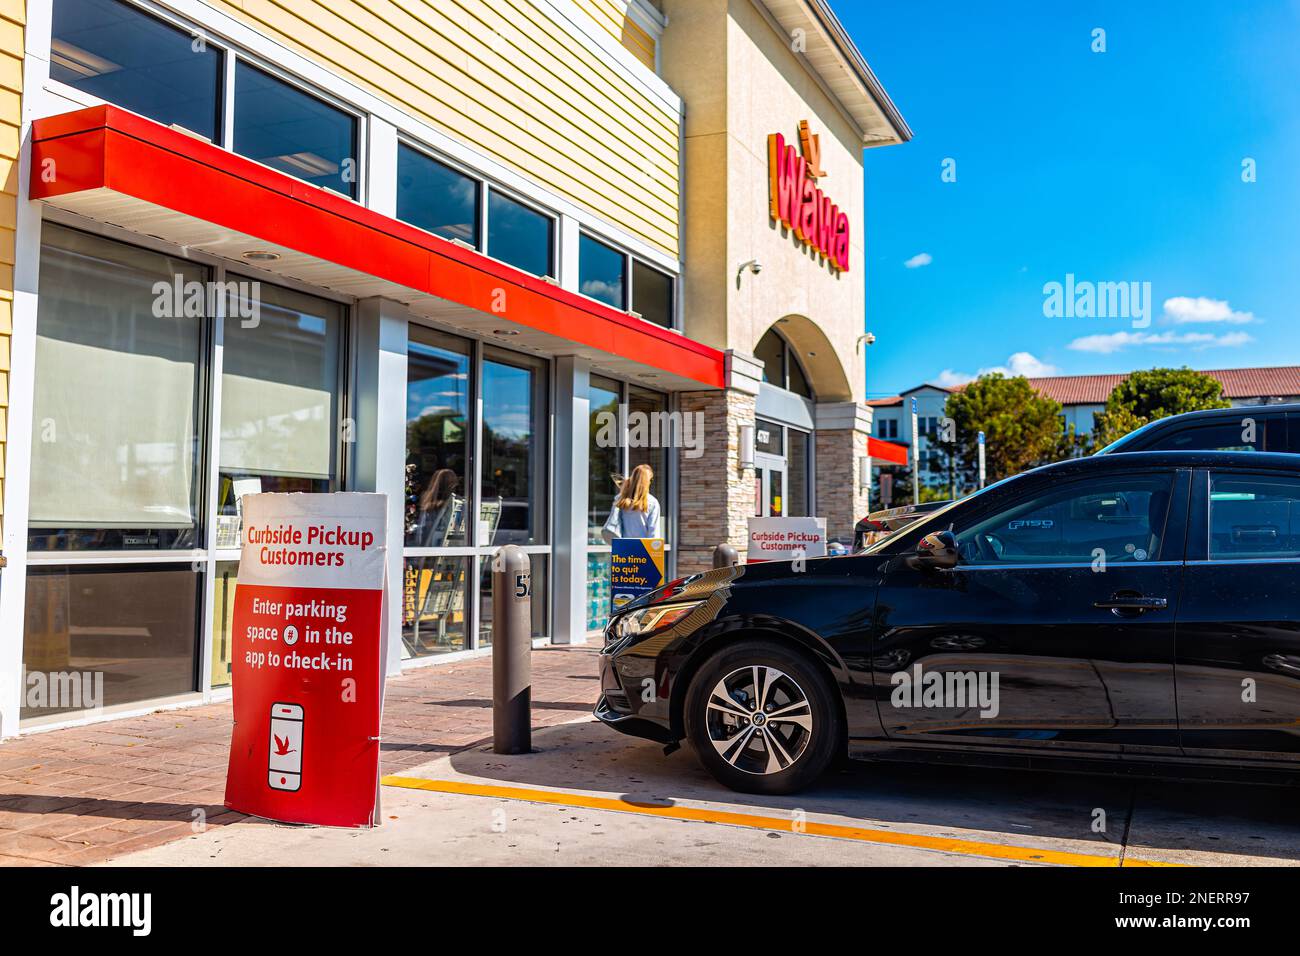 Naples, USA - January 12, 2022: Wawa gas station store exterior with sign for curbside pickup in Naples, Florida on Livingston road with cars in parki Stock Photo